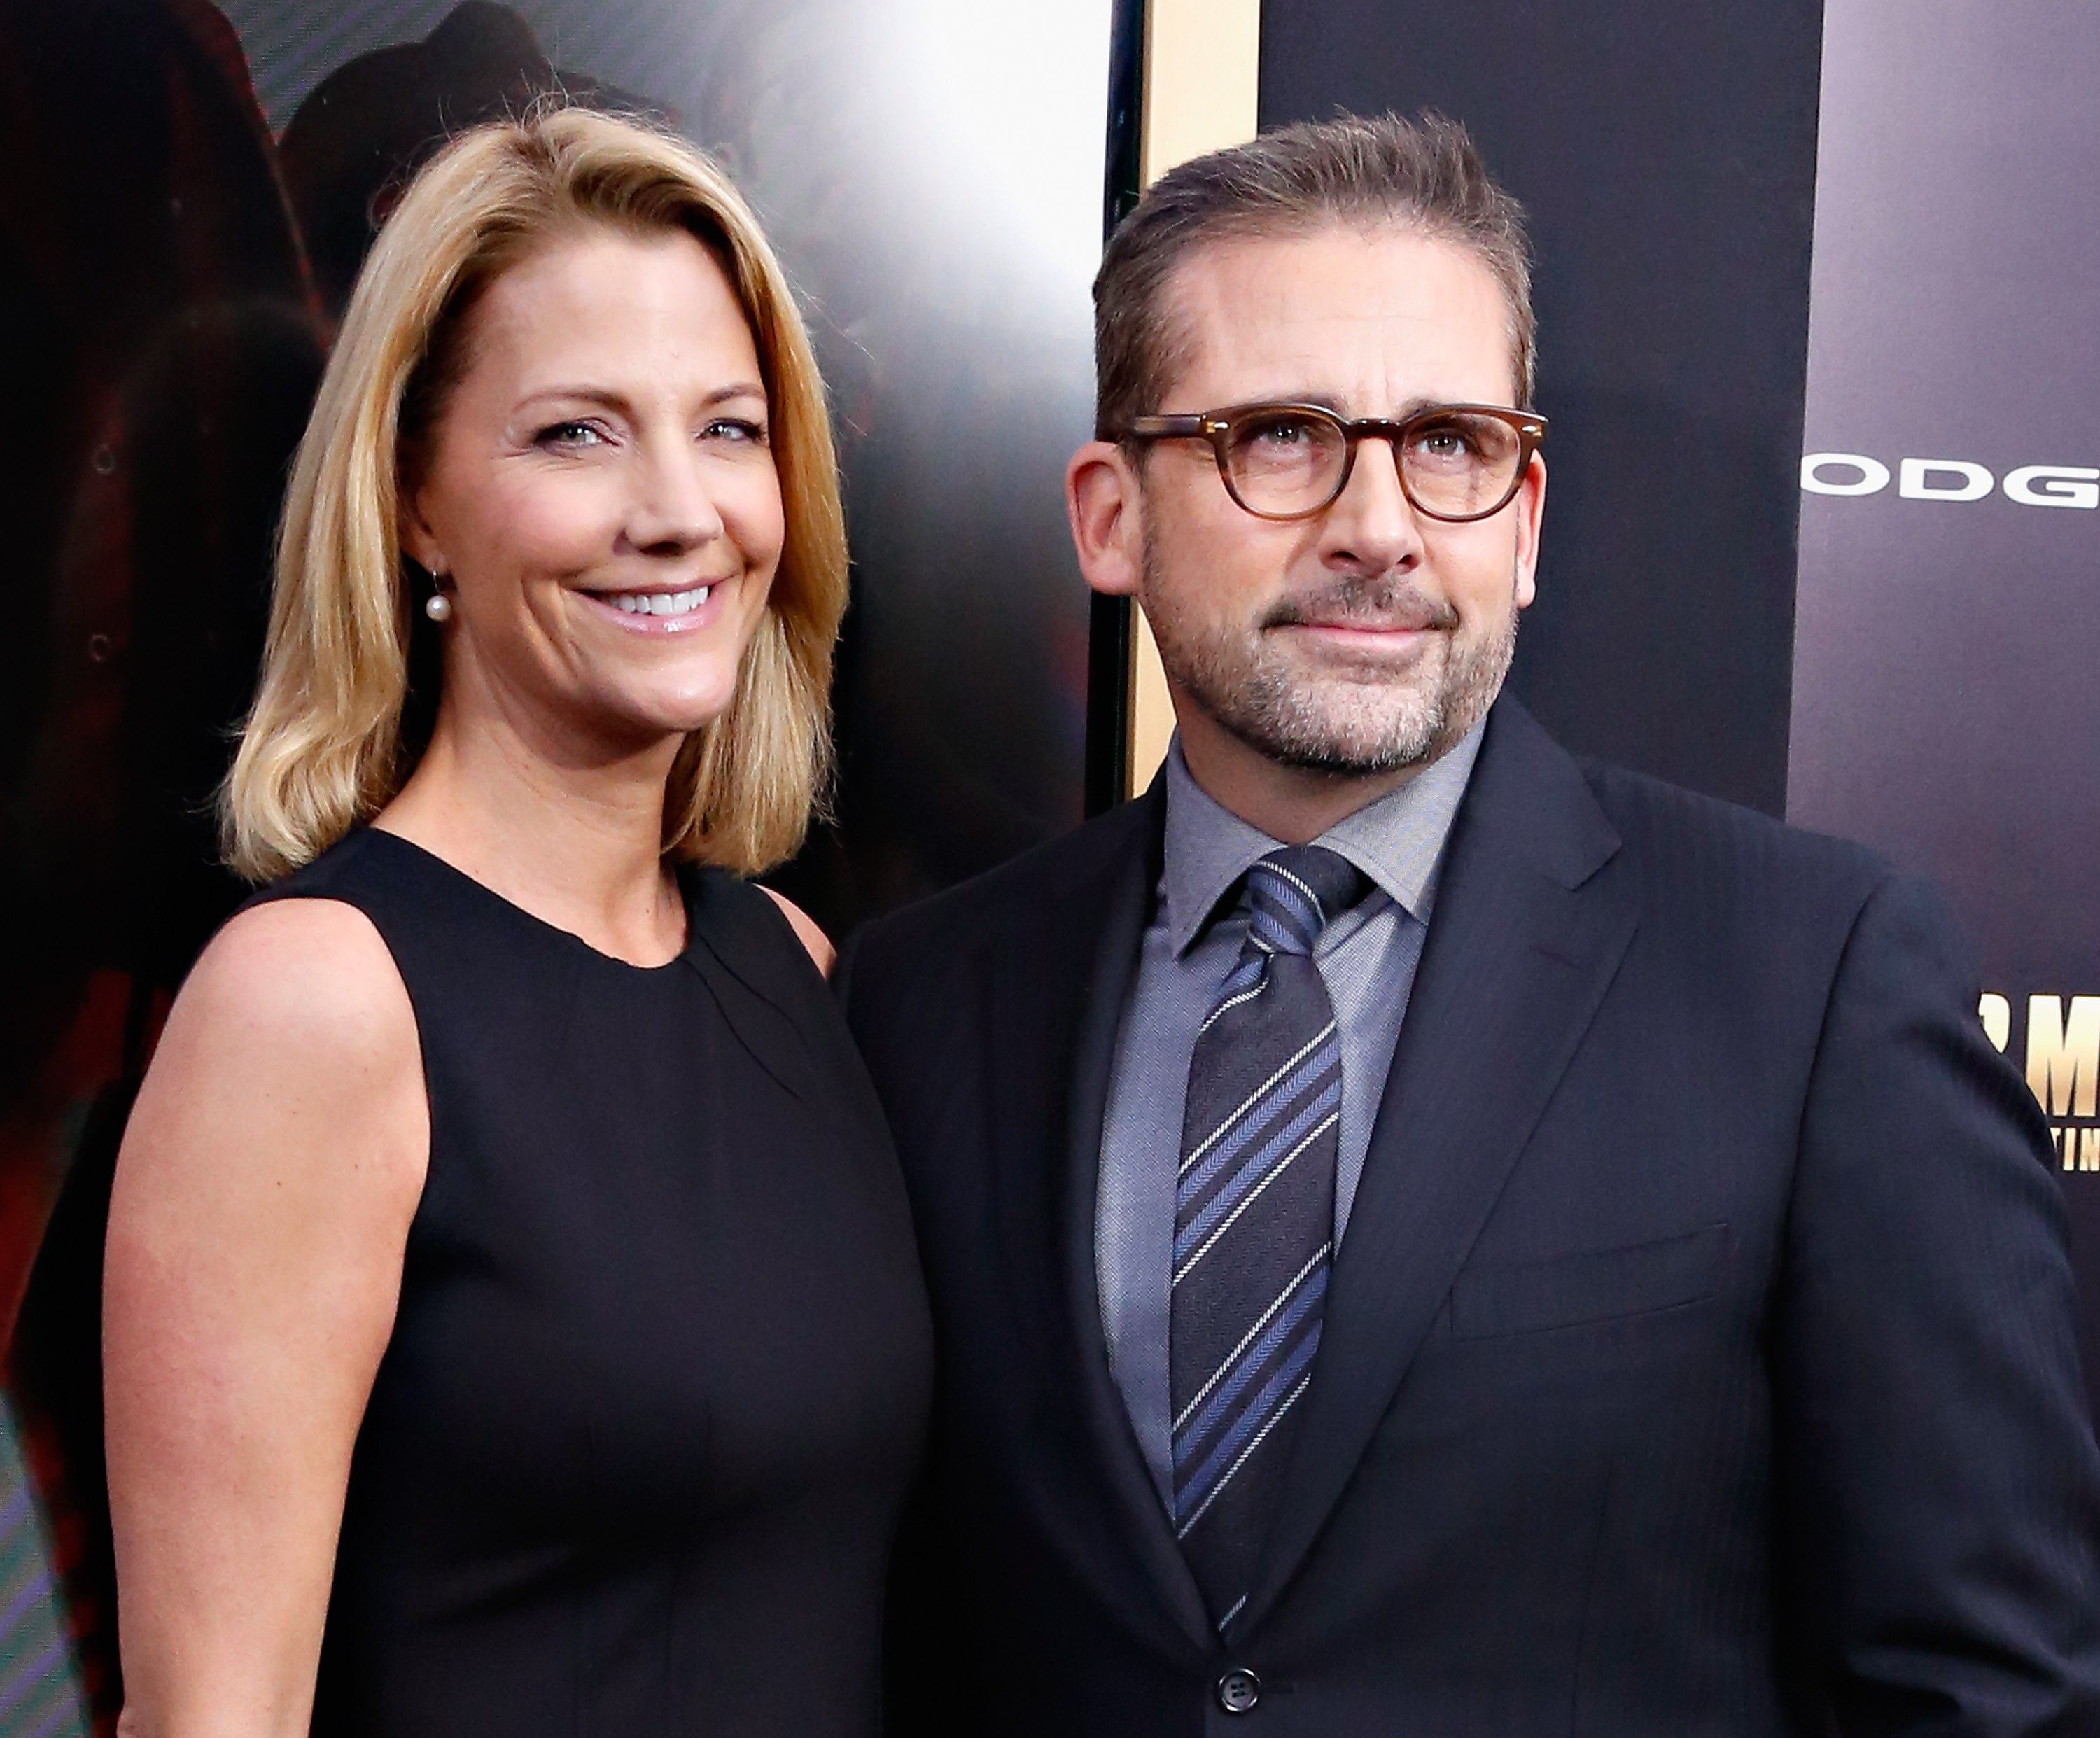 Who is Steve Carell's Wife? Nancy Carell Looks Familiar for Good Reason